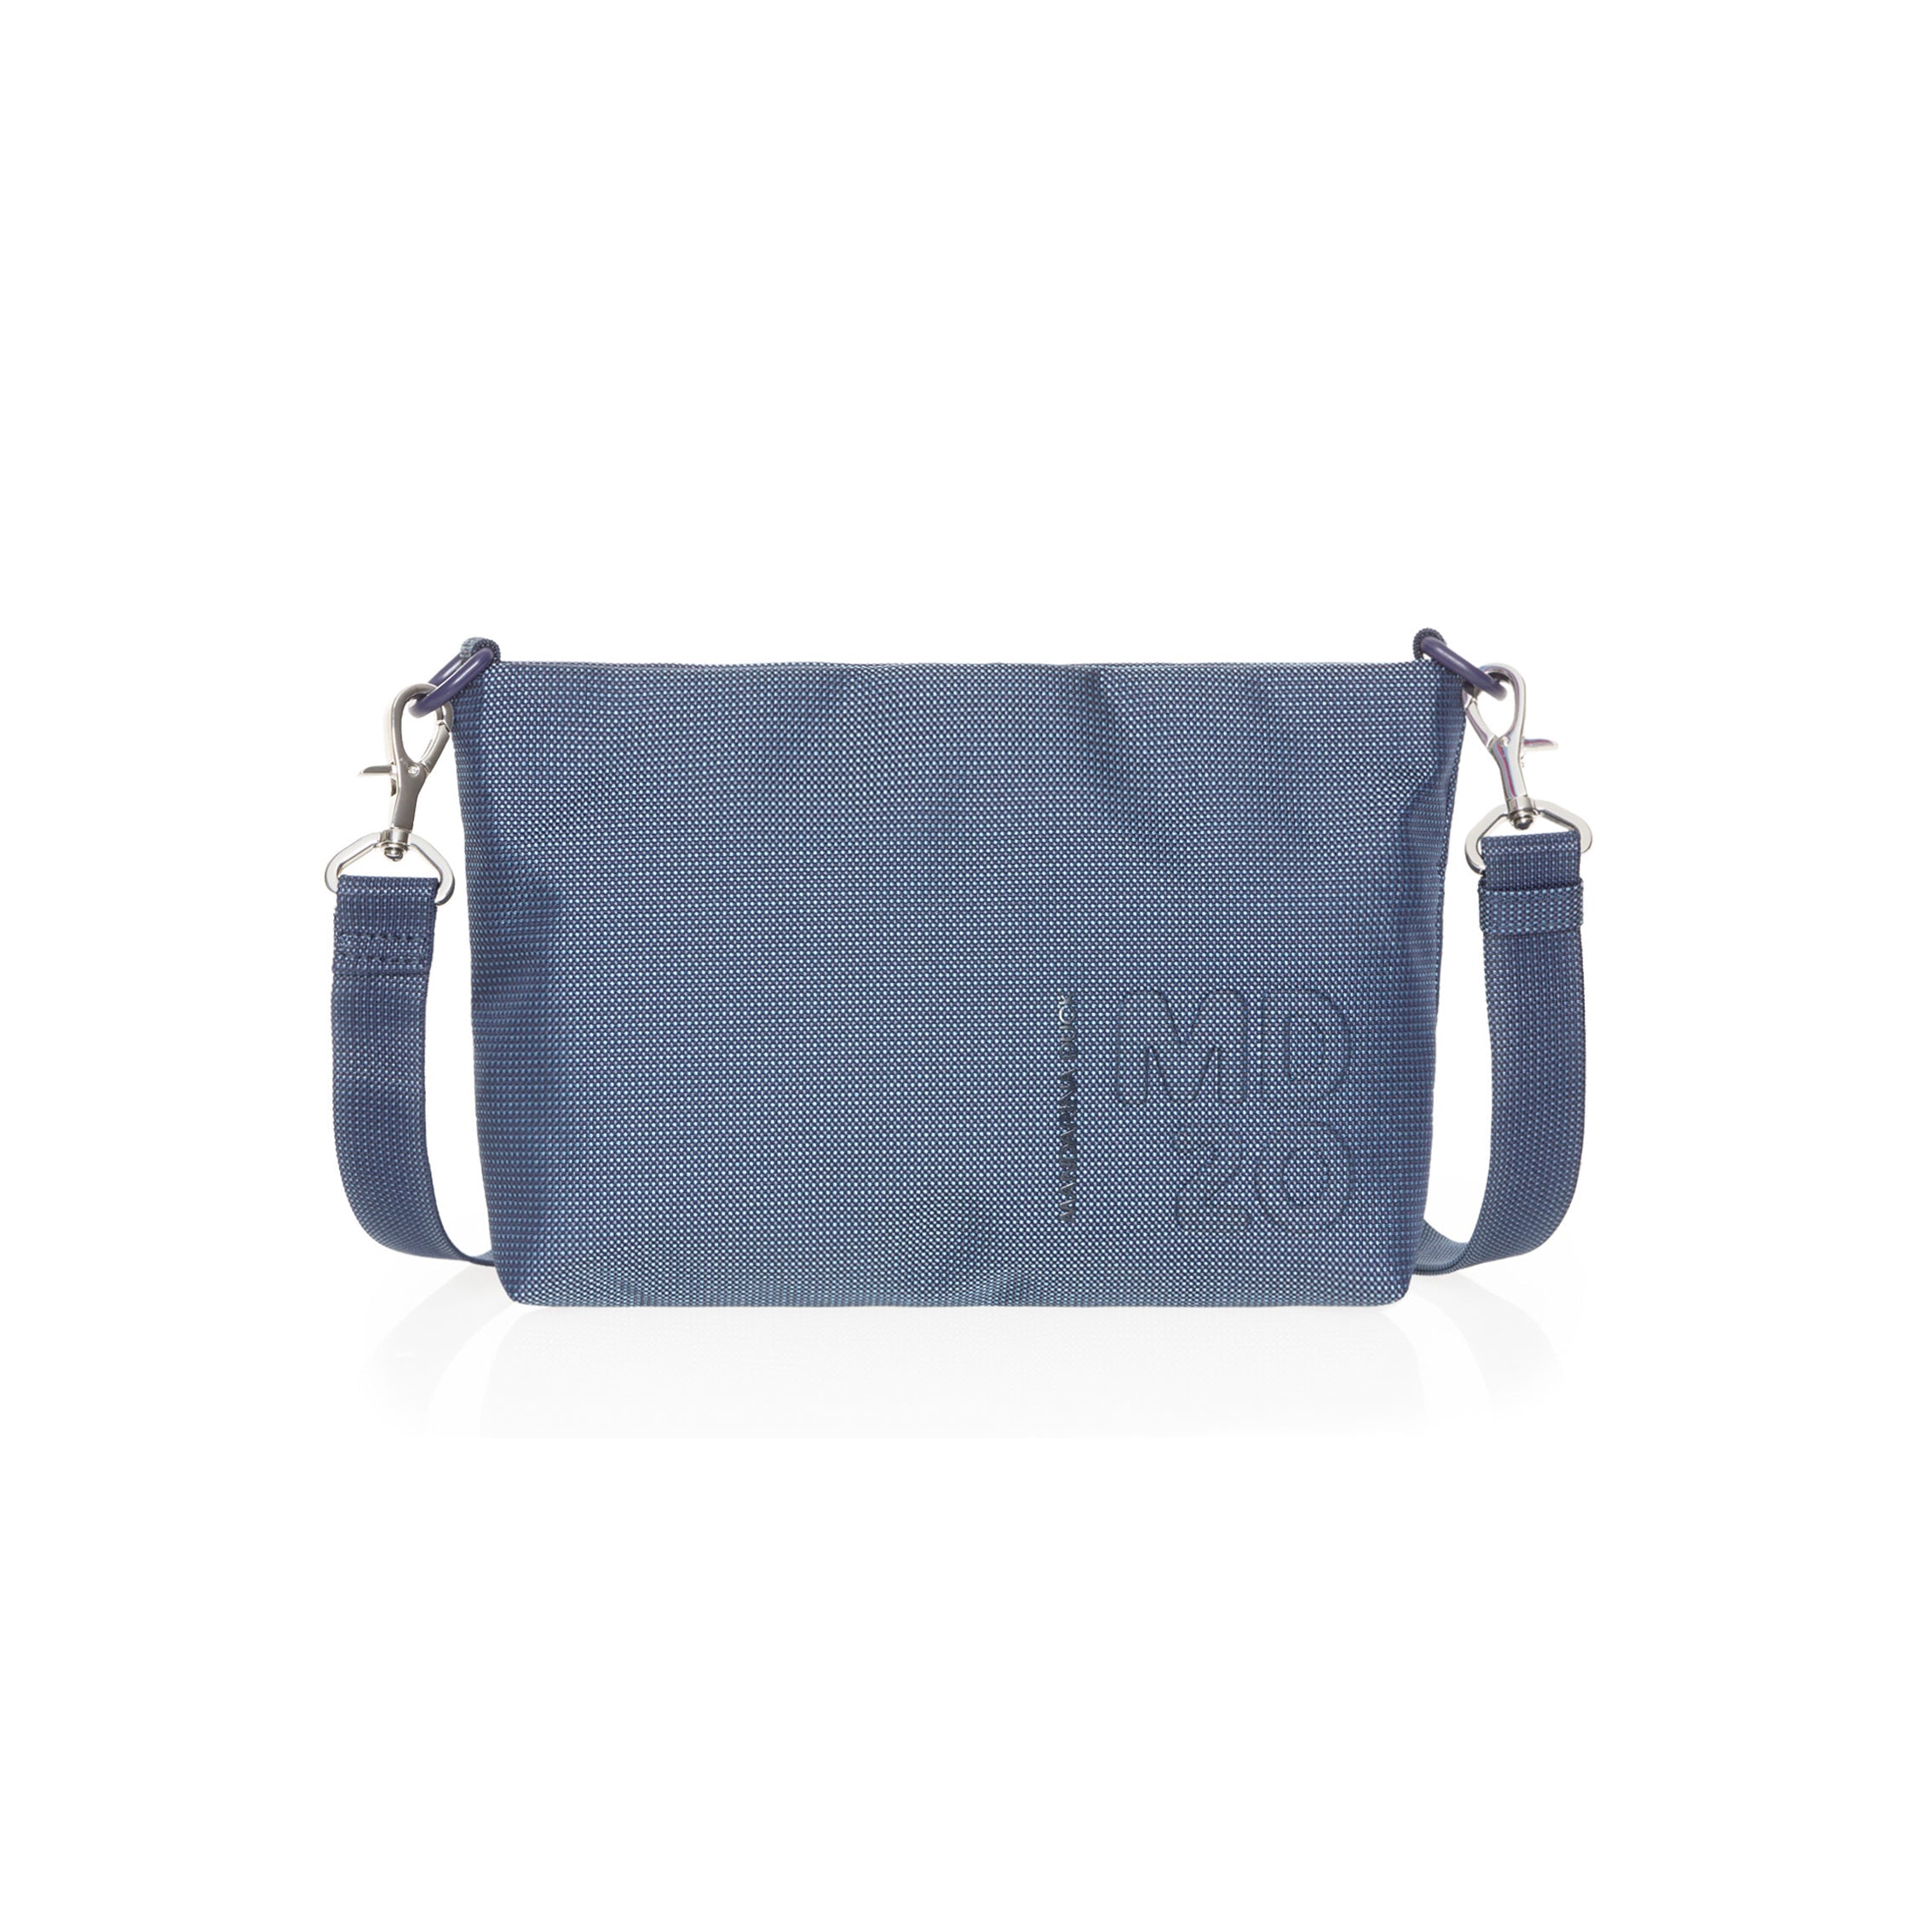 BTS] Record of RM : Indigo - Denim Tote Bag OFFICIAL MD – HISWAN